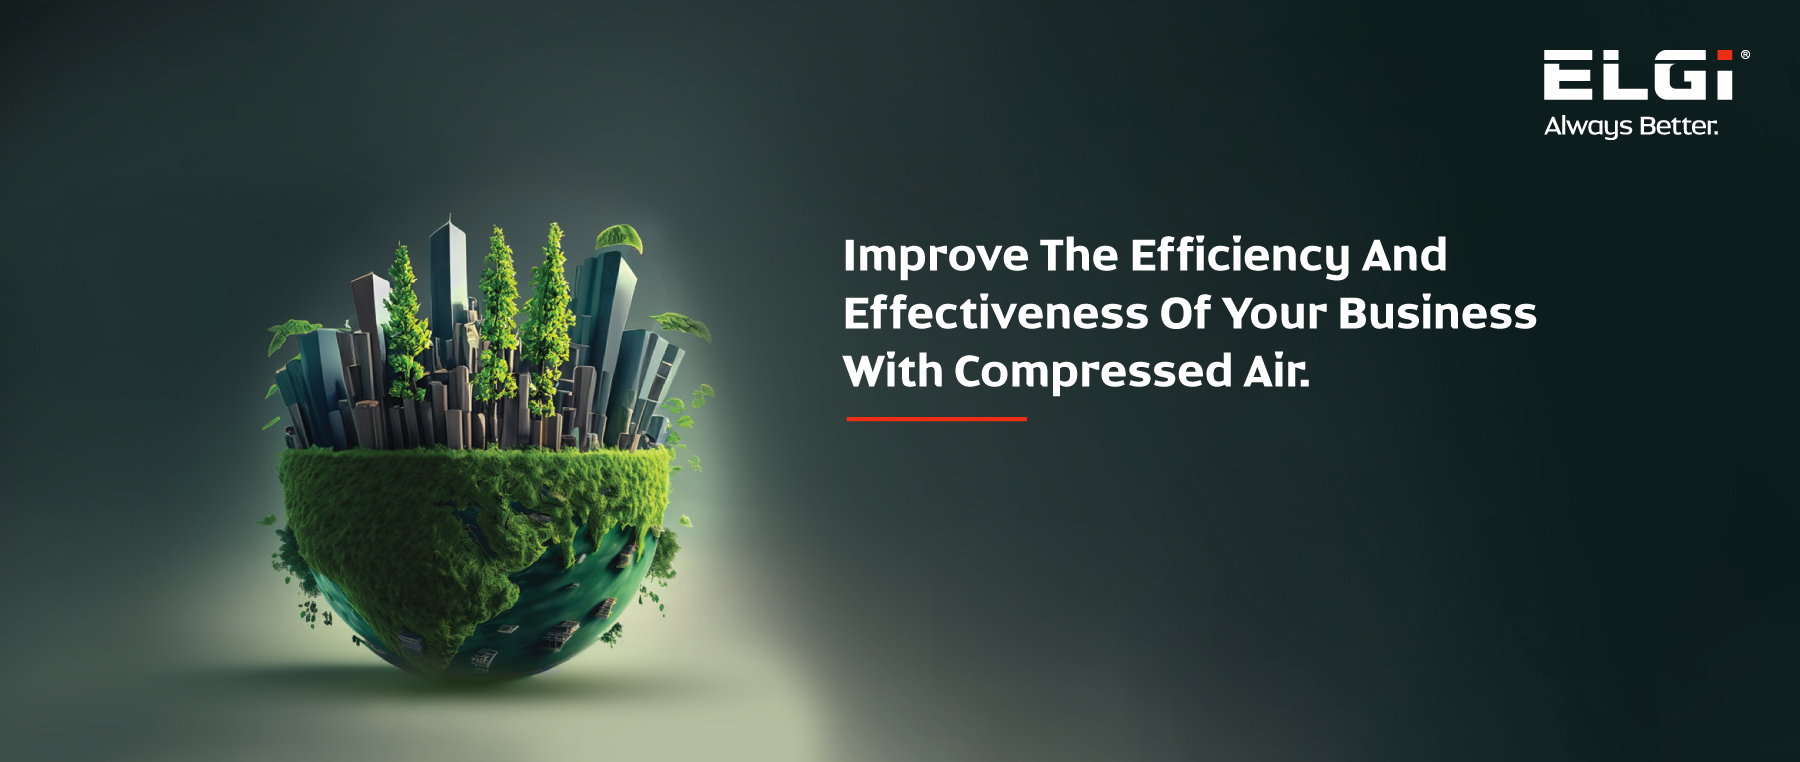 Improve the efficiency and effectiveness of your business with compressed air